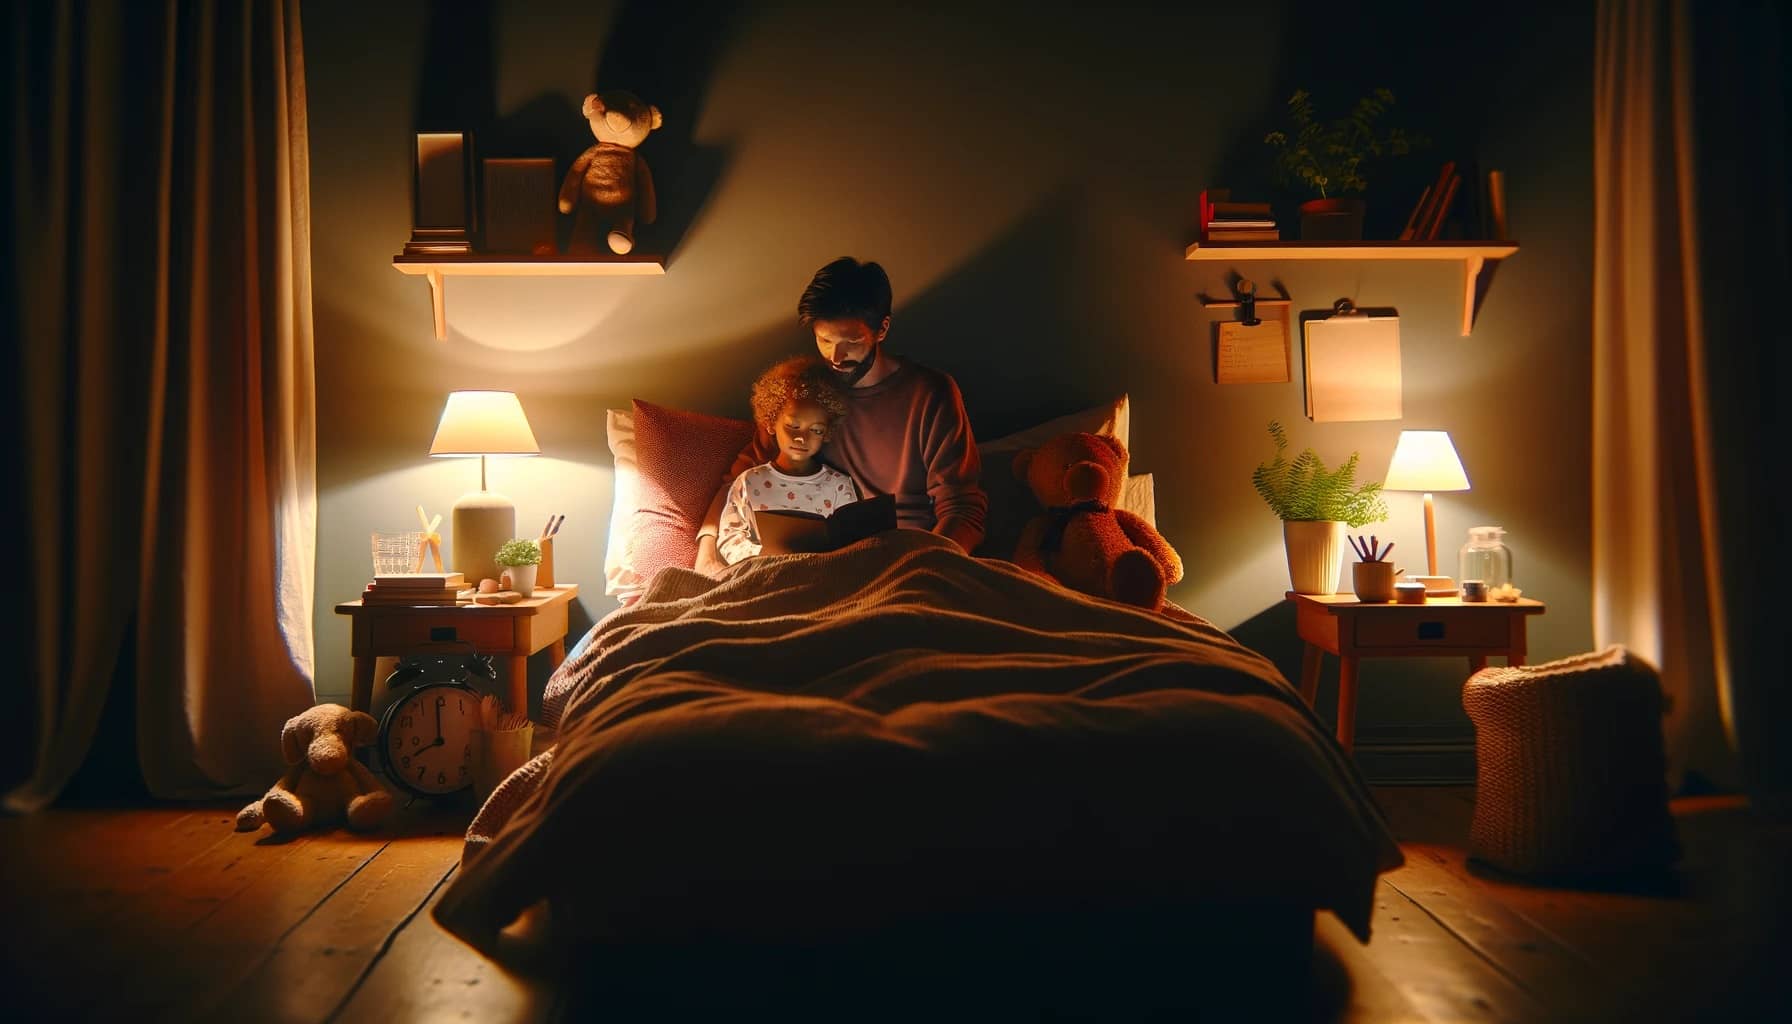 calming bedtime routine between a parent and child in a dimly lit bedroom